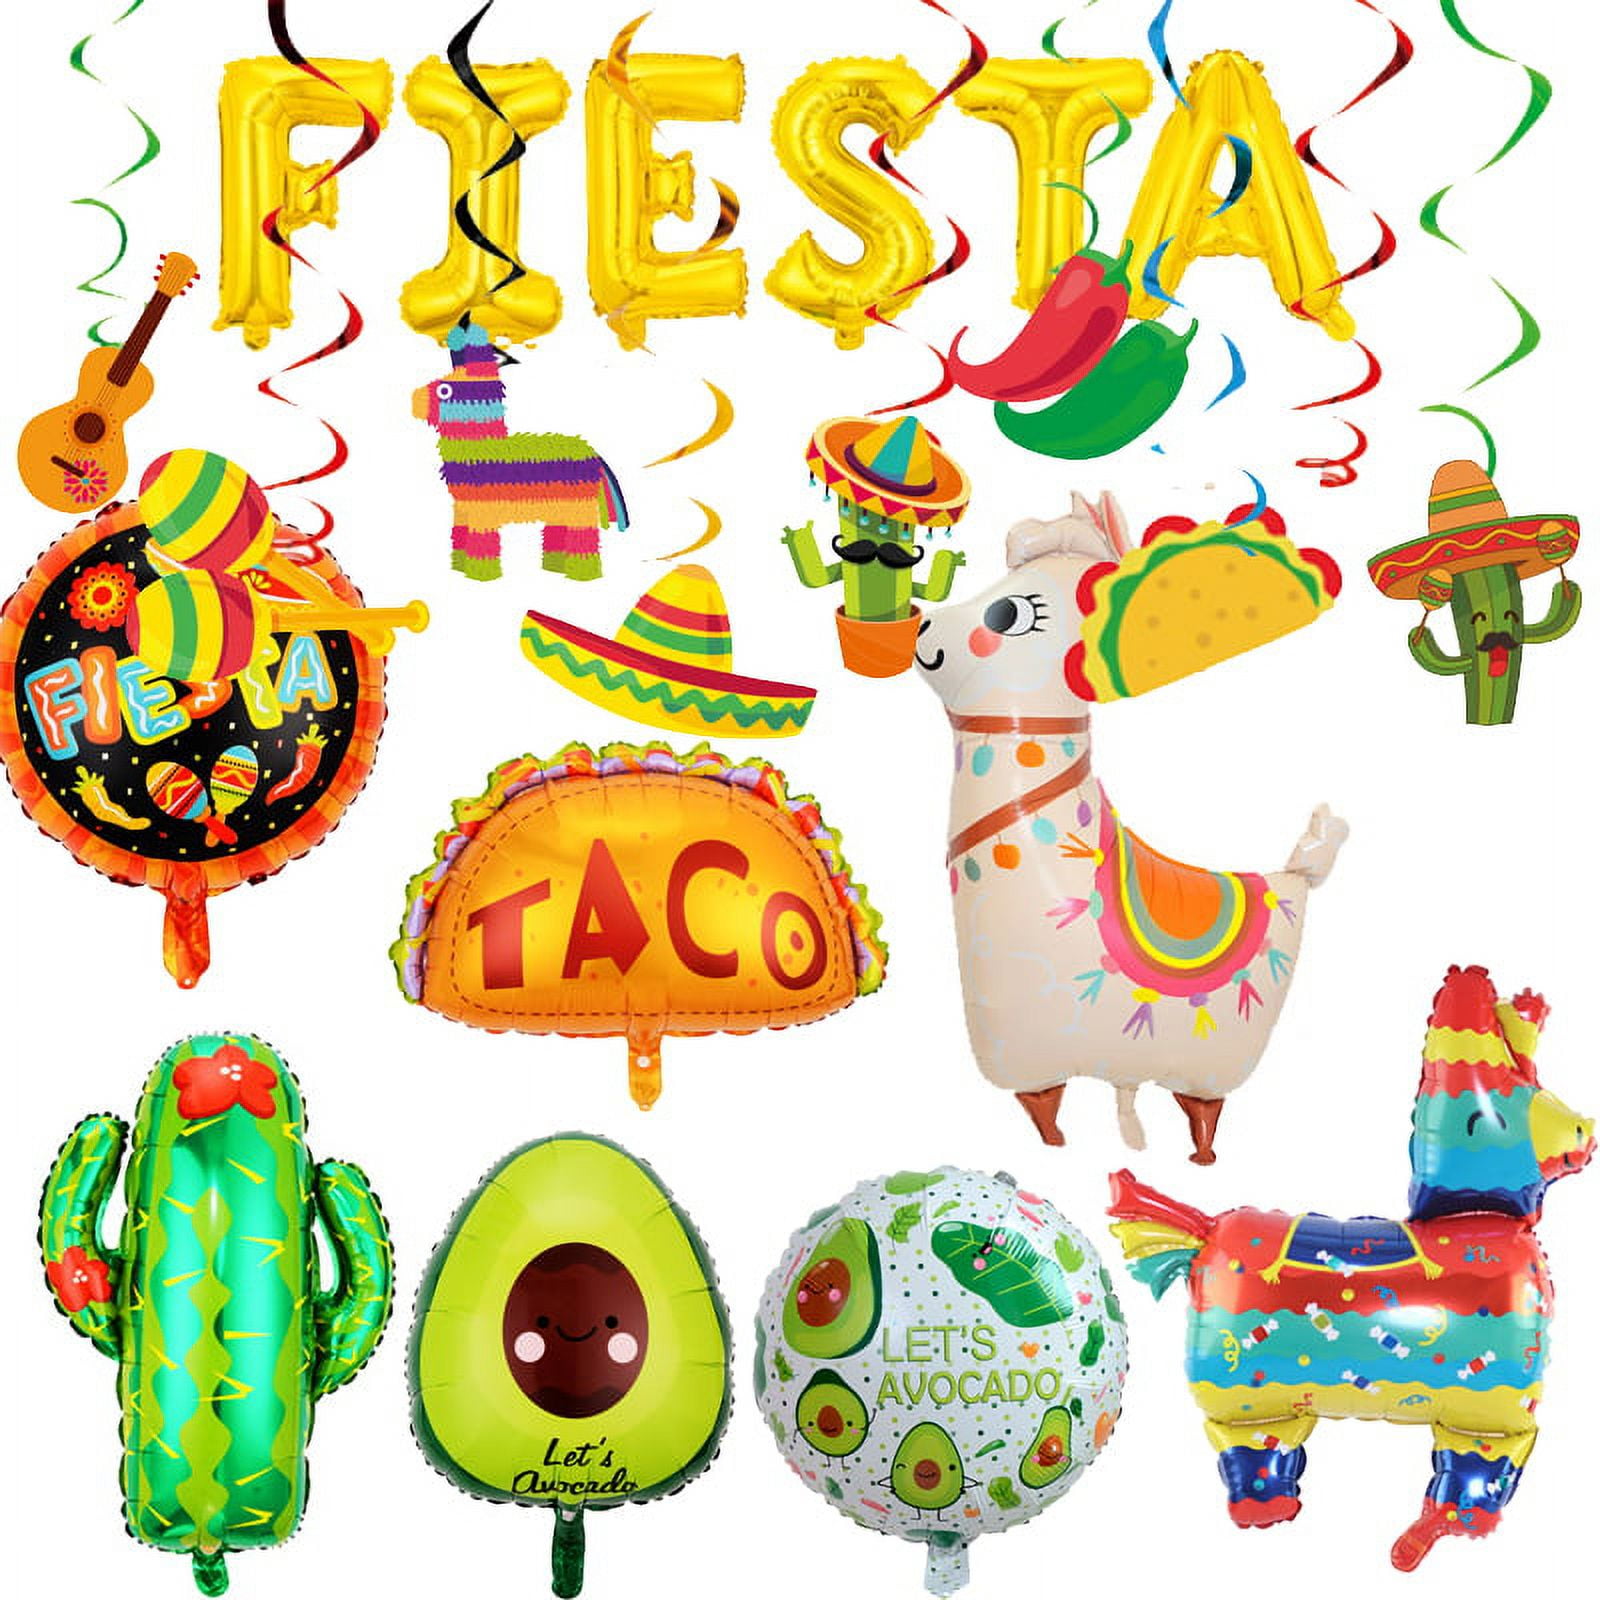 Cinco de Mayo Decor, 43pcs Fiesta Party Supplies Decorations, Mexican Party Decoration Pack Colorful Tissue Pom Poms, Hanging Paper Fans and Banner